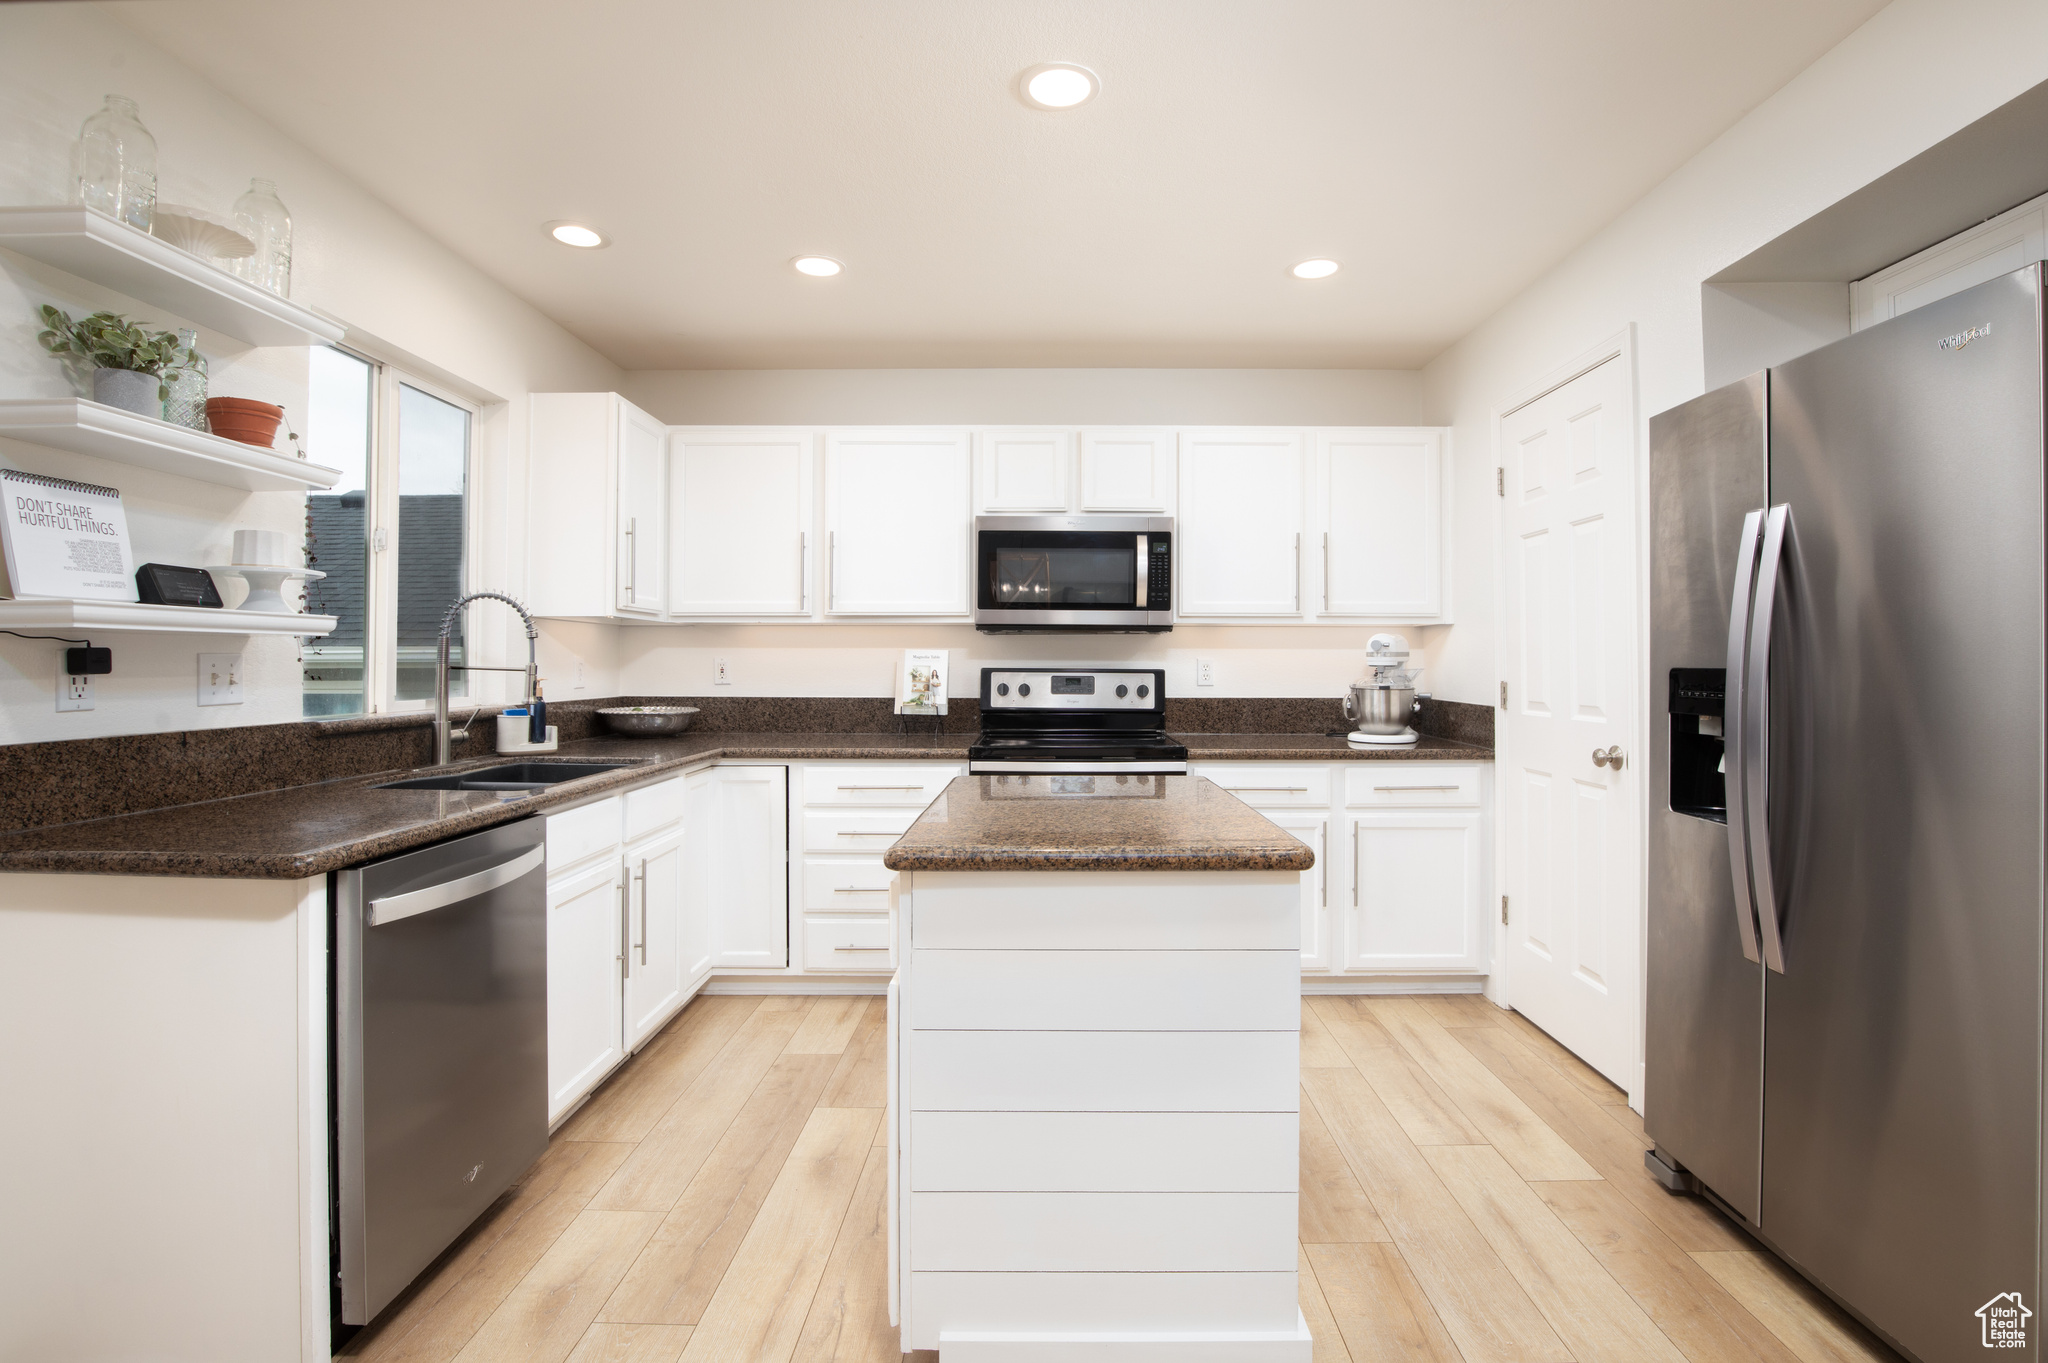 Kitchen with appliances with stainless steel finishes, sink, a kitchen island, and white cabinets